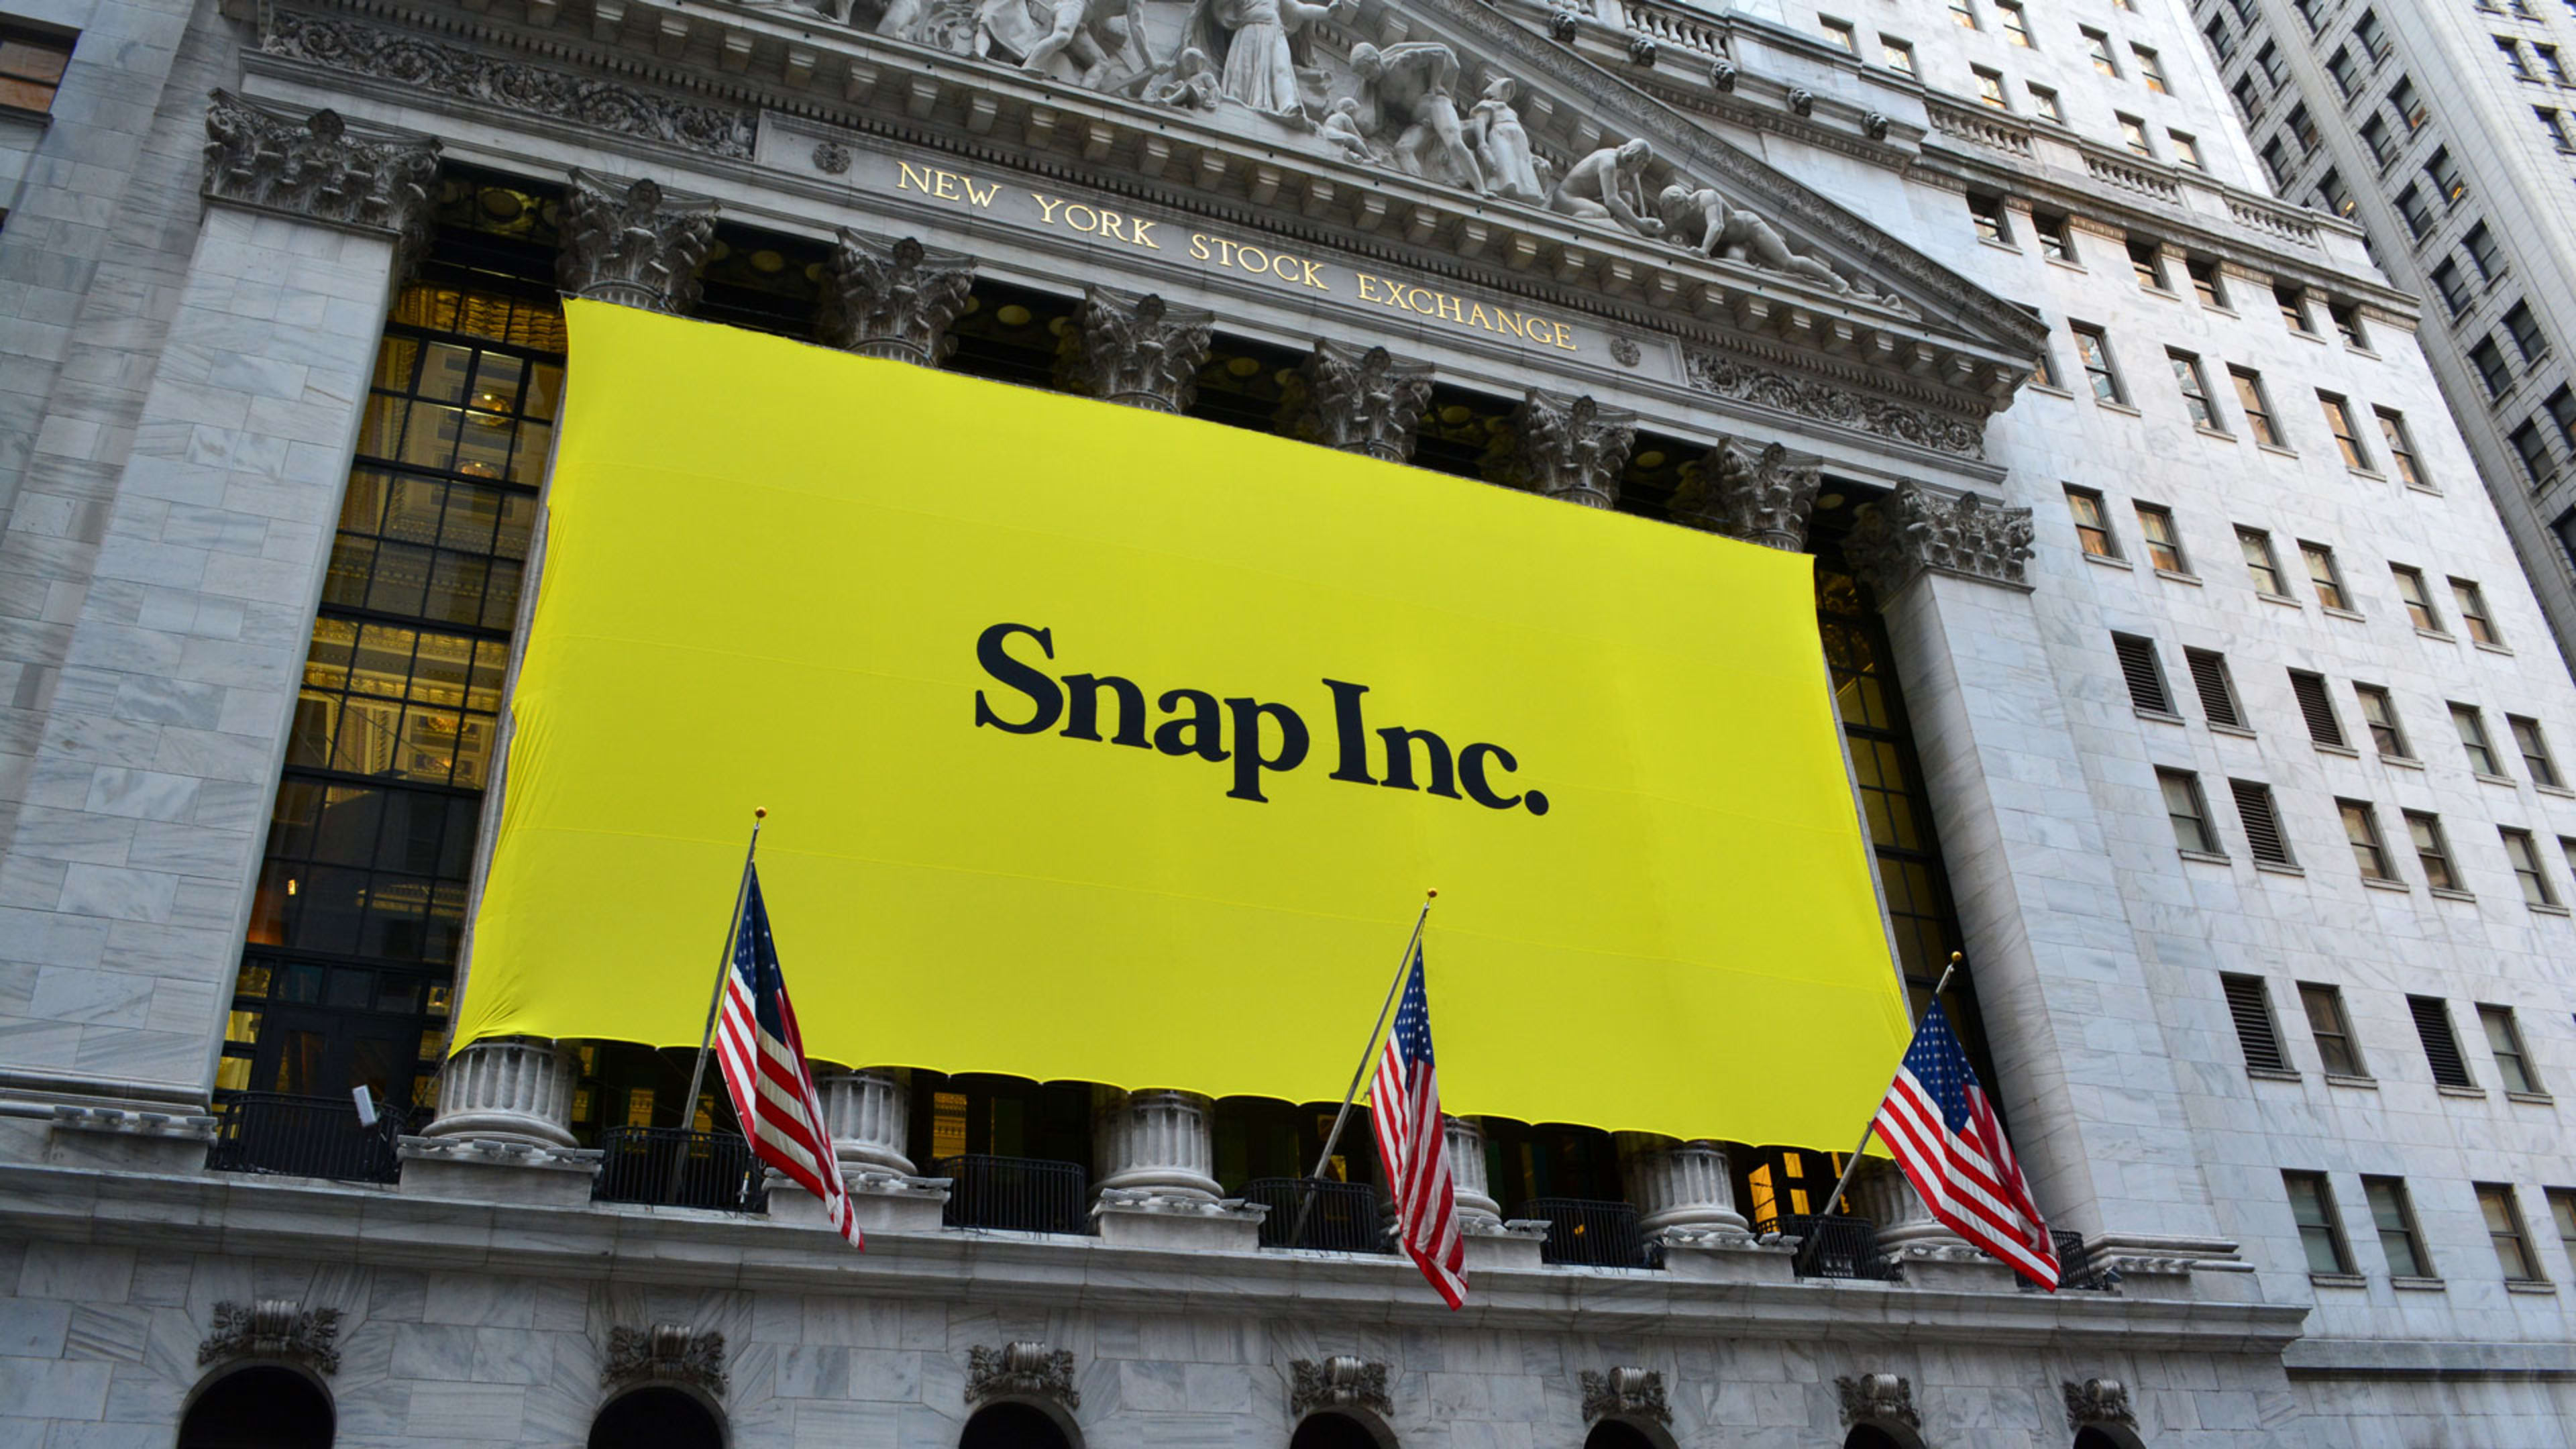 Snap stock up big after earnings beat expectations, daily users soar